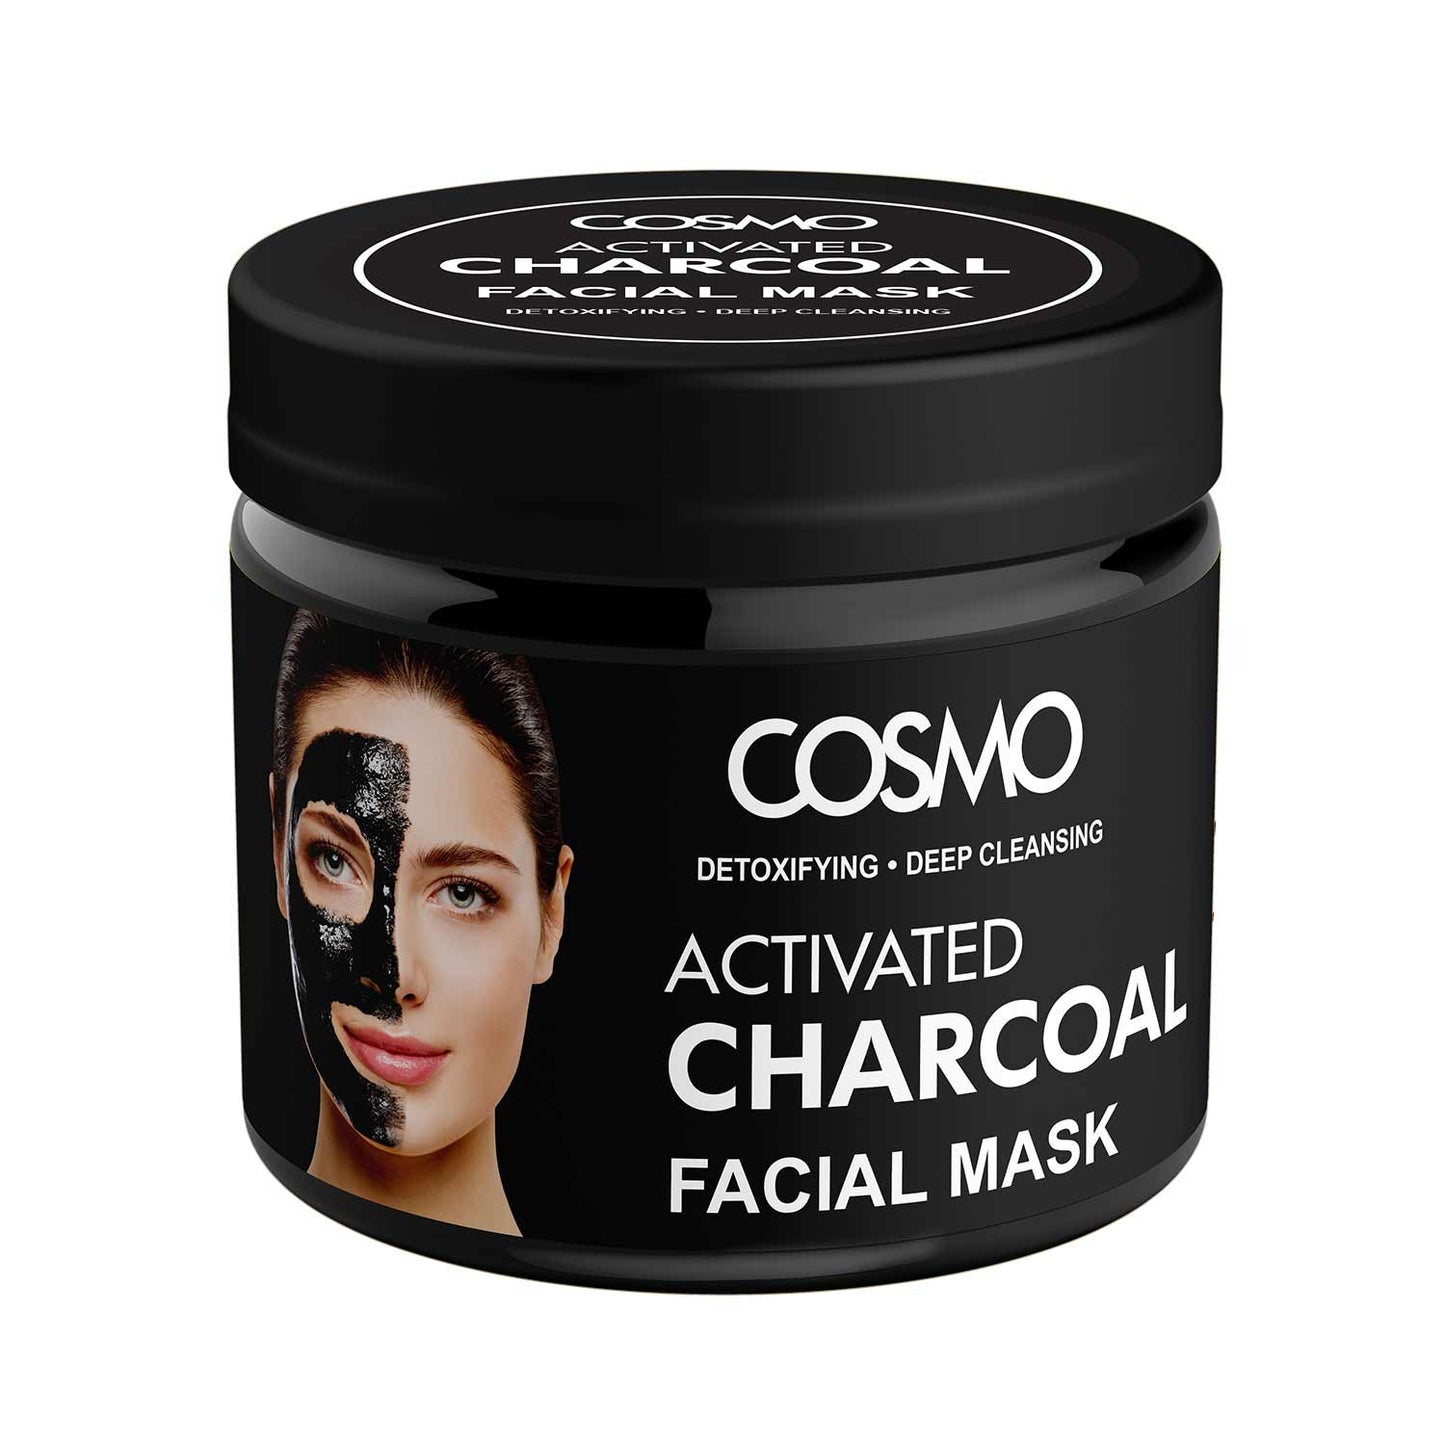 ACTIVATED CHARCOAL FACIAL MASK - 200G